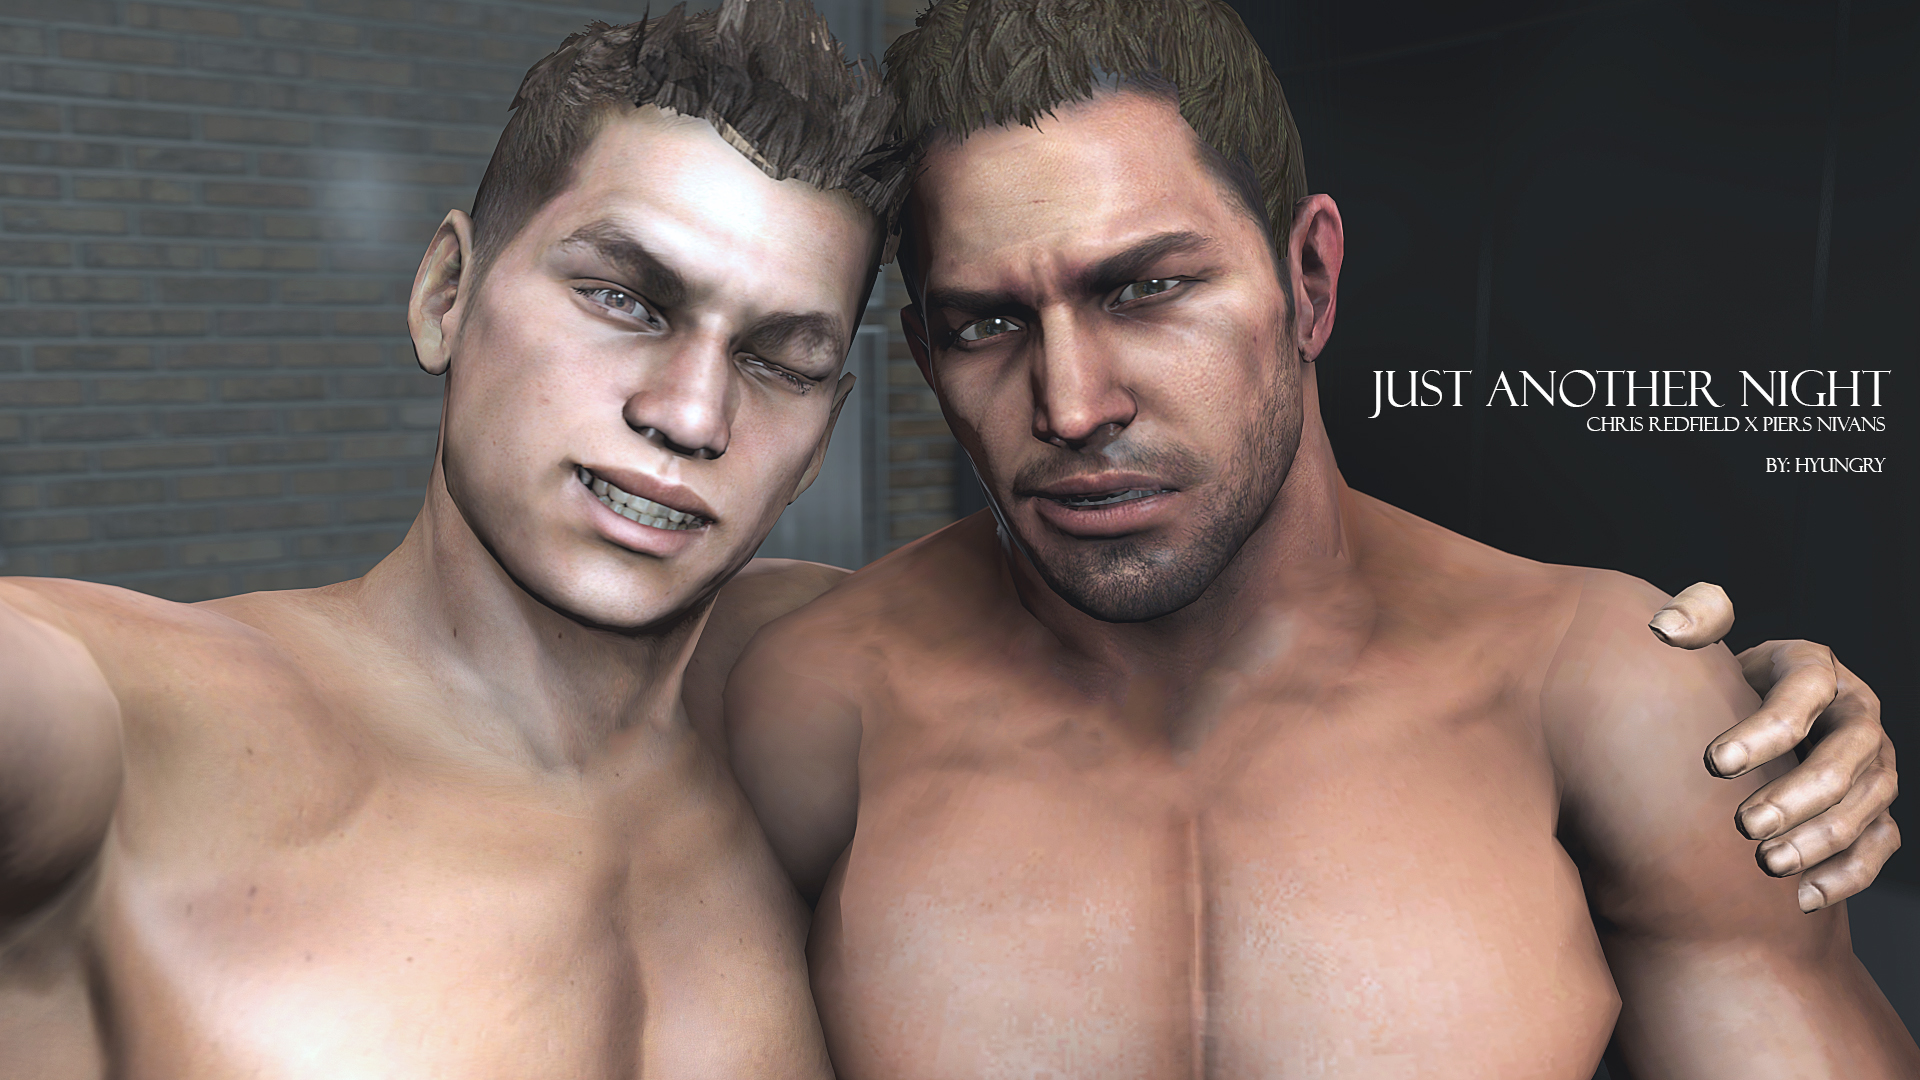 Hyungry Resident Evil バ イ オ ハ ザ-ド Just Another Night Chris Redfield x Piers...